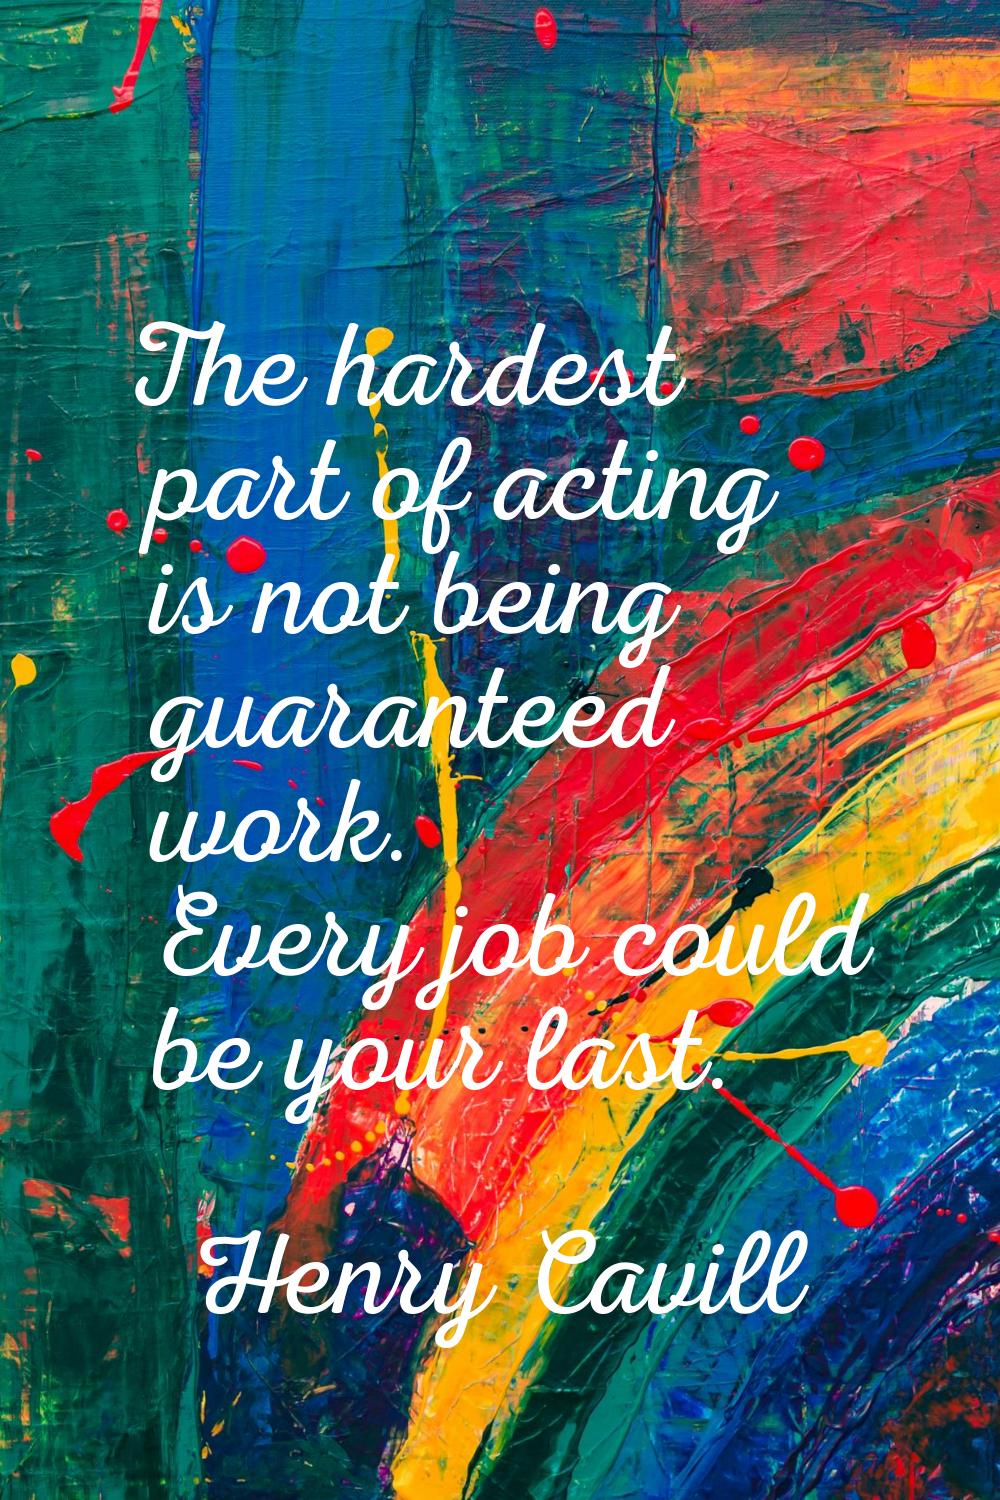 The hardest part of acting is not being guaranteed work. Every job could be your last.